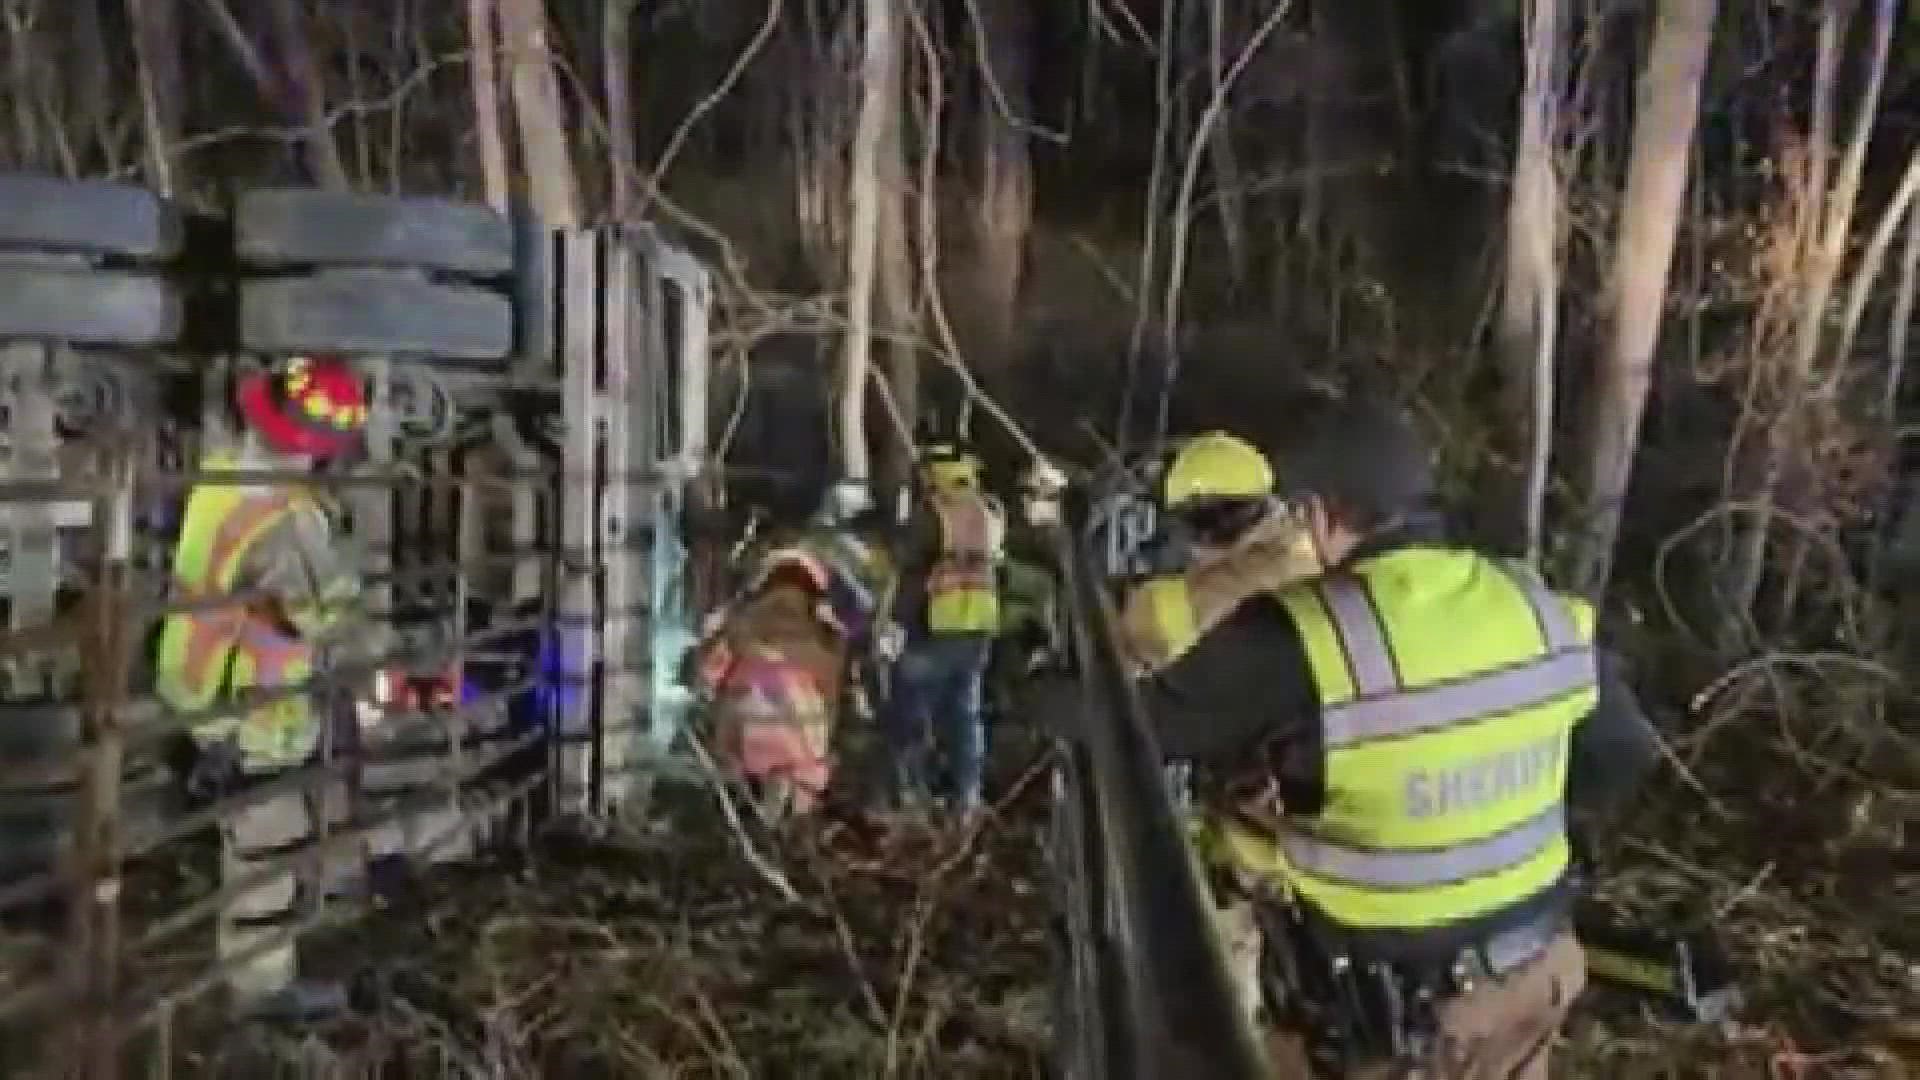 At least 12 head of cattle roamed free after the semi they were on overturned on I-64 near I-69 in Warrick County.